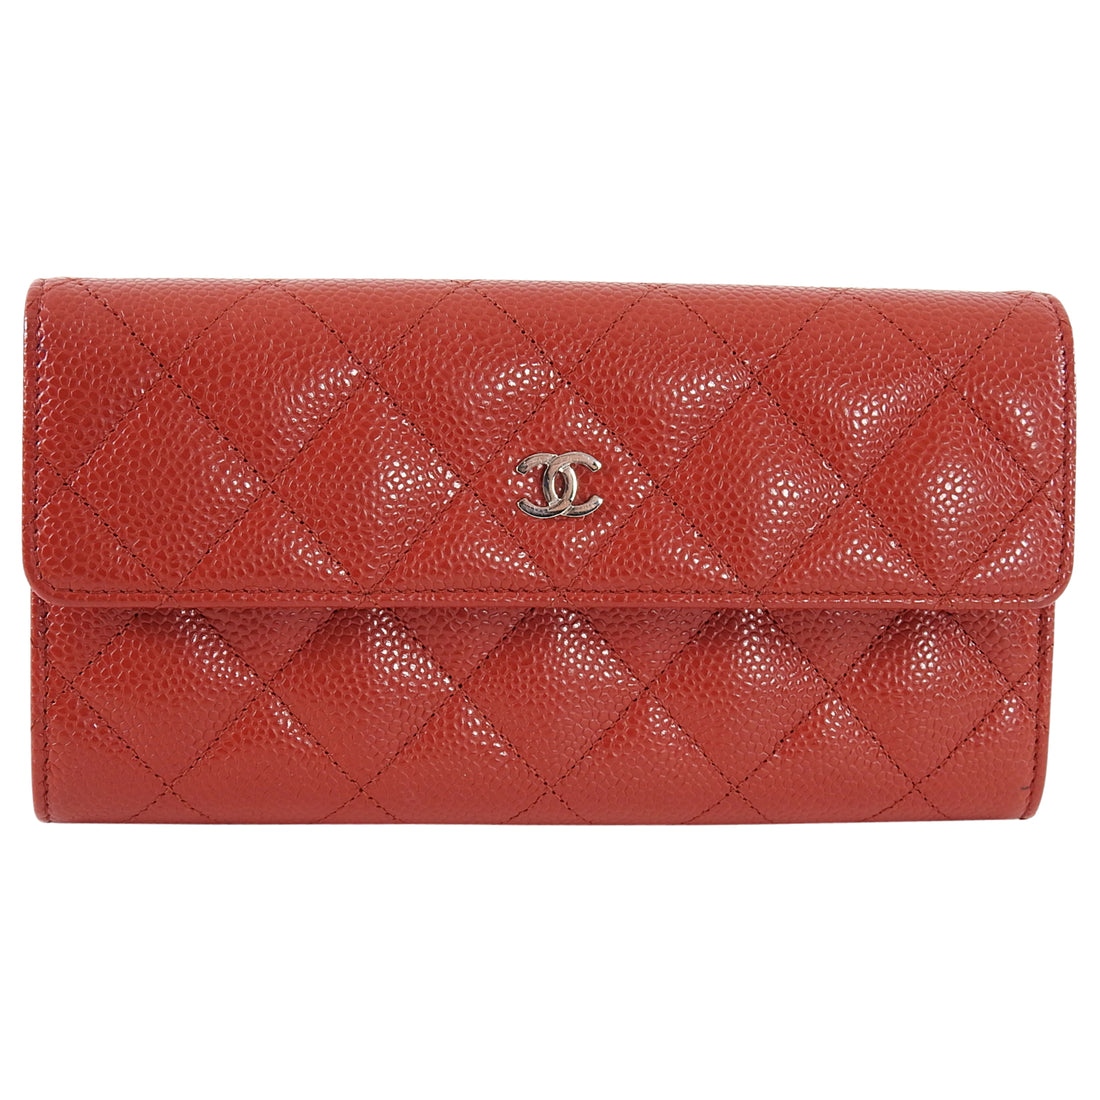 Chanel Caviar Quilt Continental CC Long Wallet – I MISS YOU VINTAGE